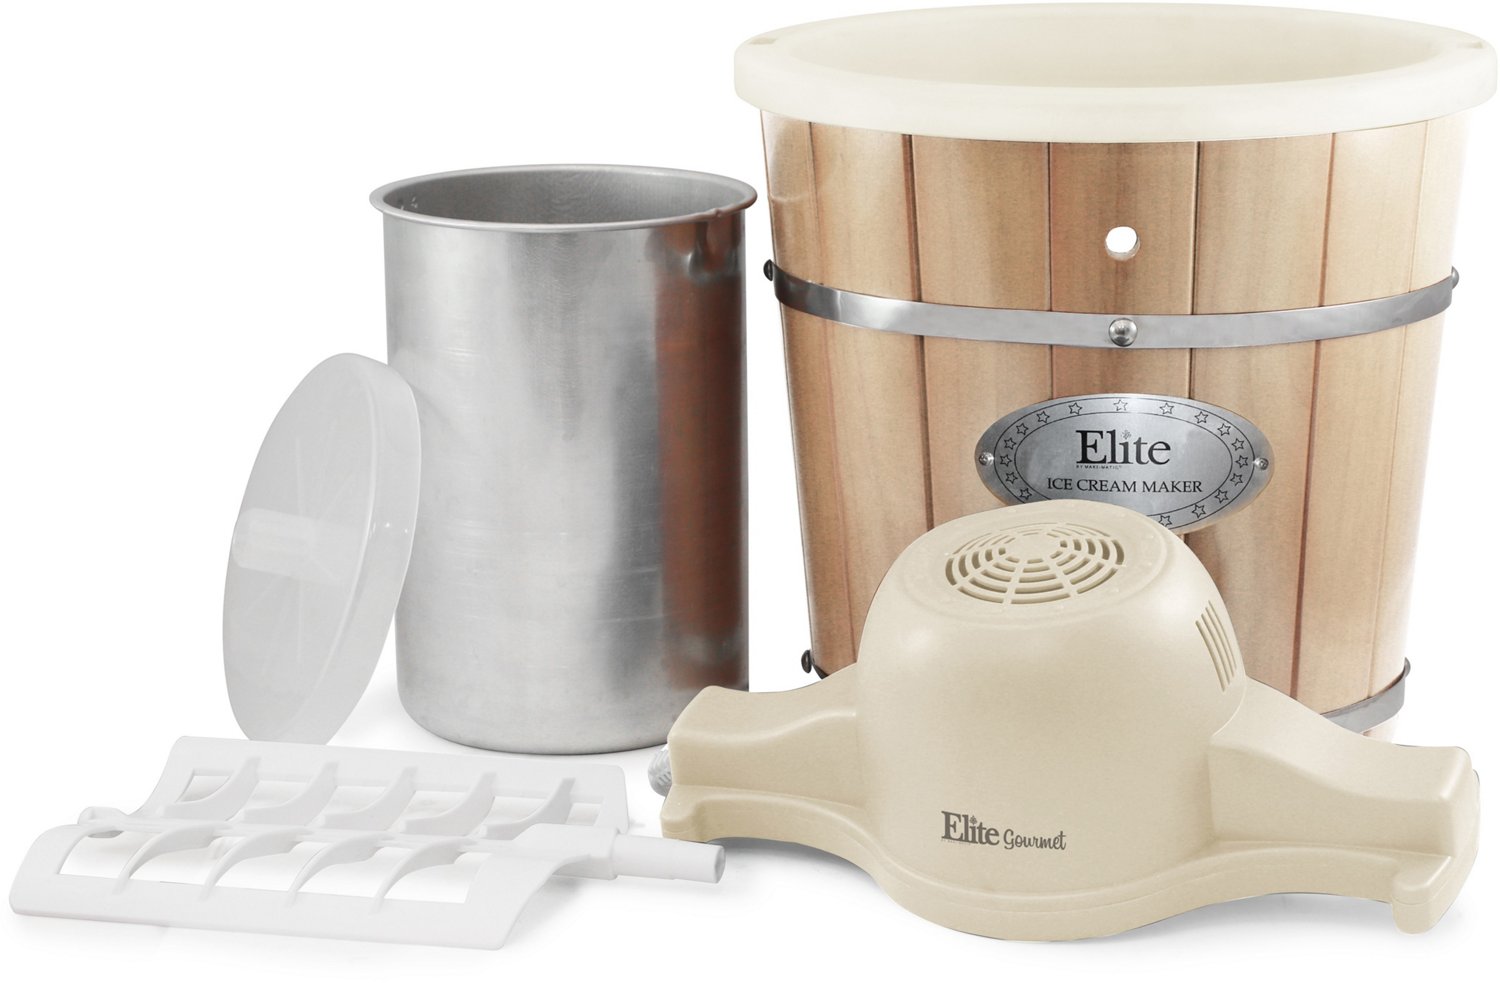 4 Qt. Electric Motorized Old-Fashioned Bucket Ice Cream Maker